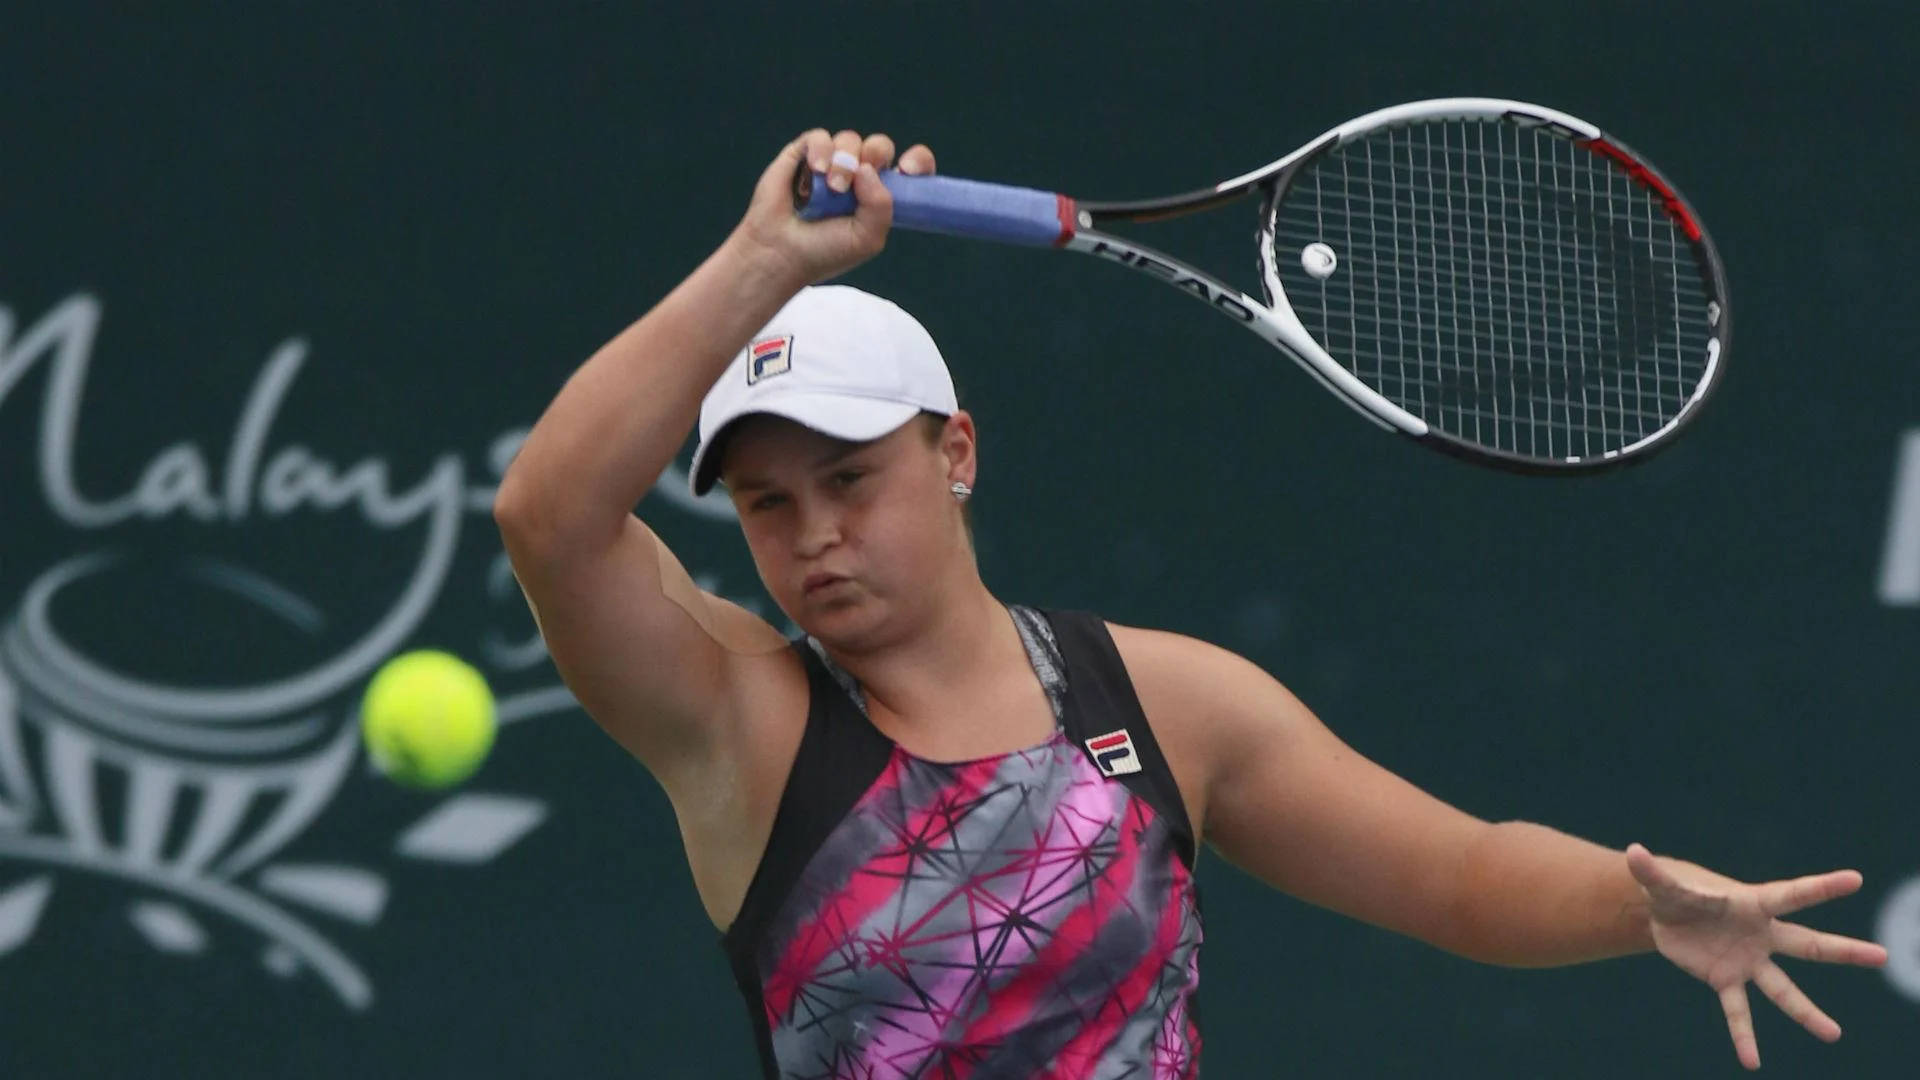 Ashleigh Barty And Approaching Tennis Ball Wallpaper